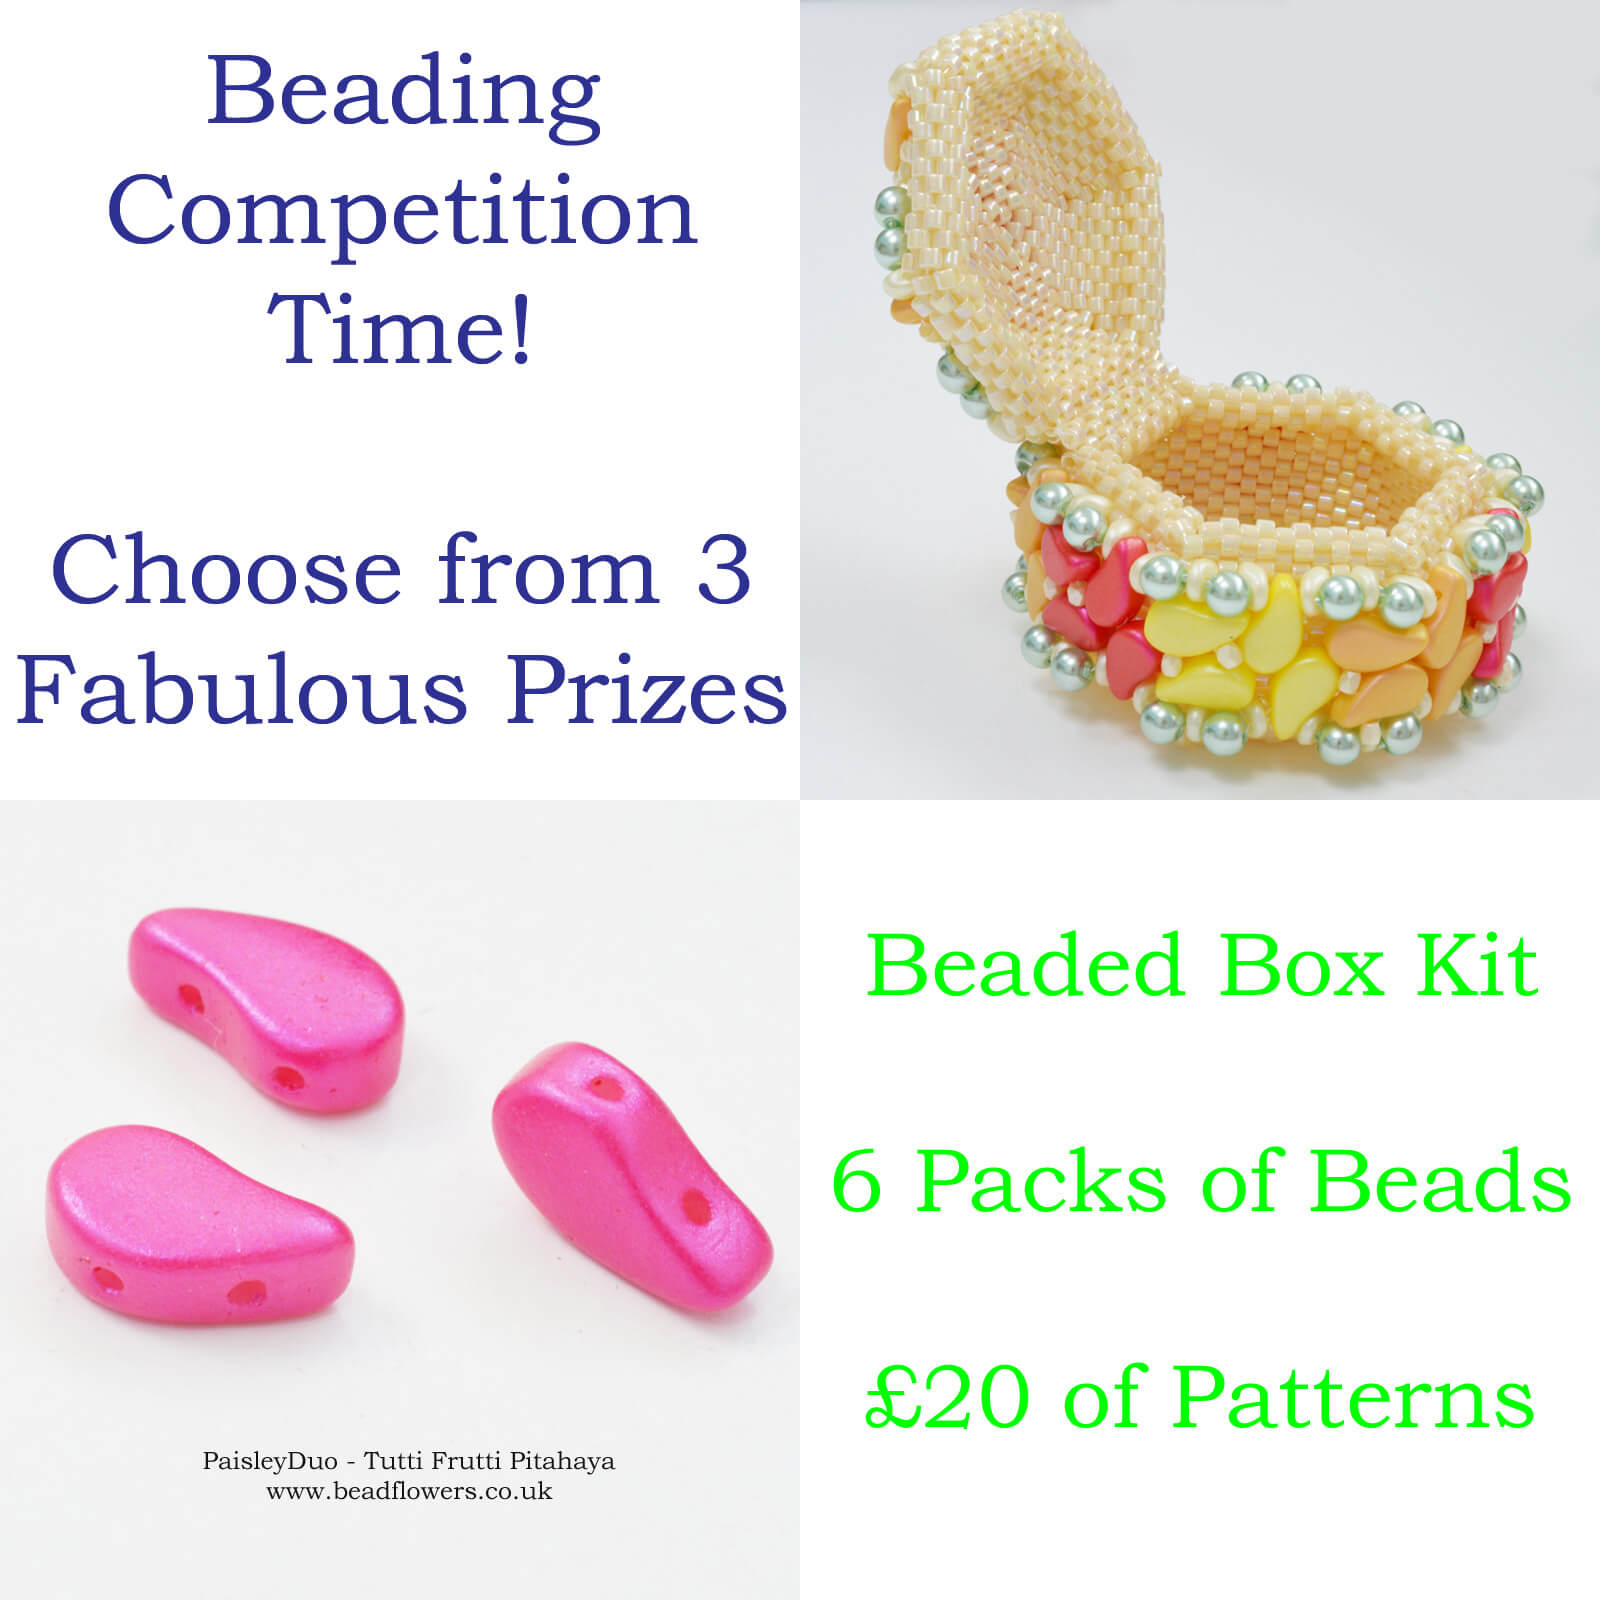 Beading Competition